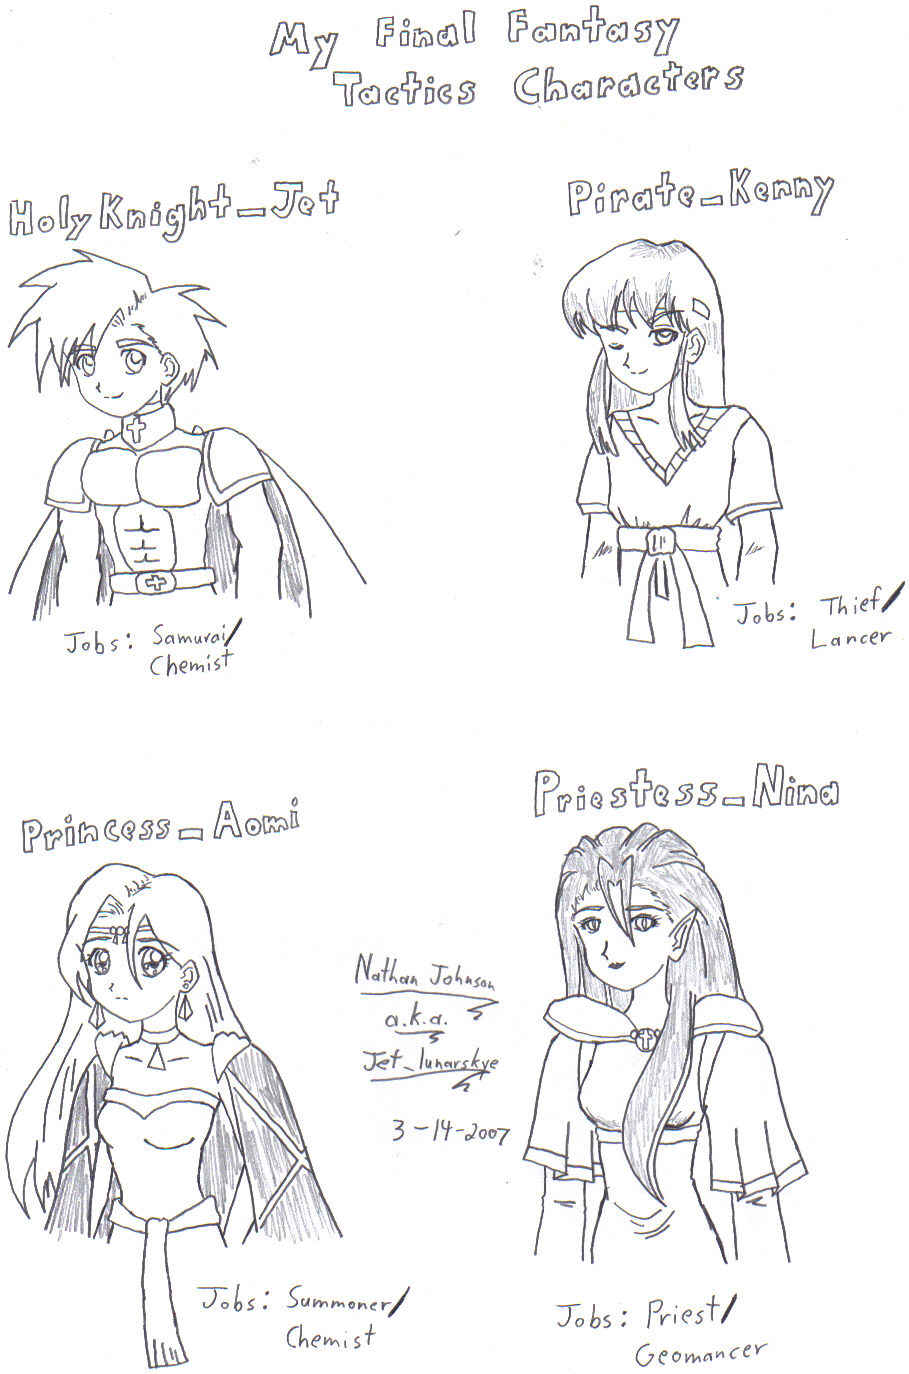 My Final Fantasy Tactics characters by Jet_lunarskye